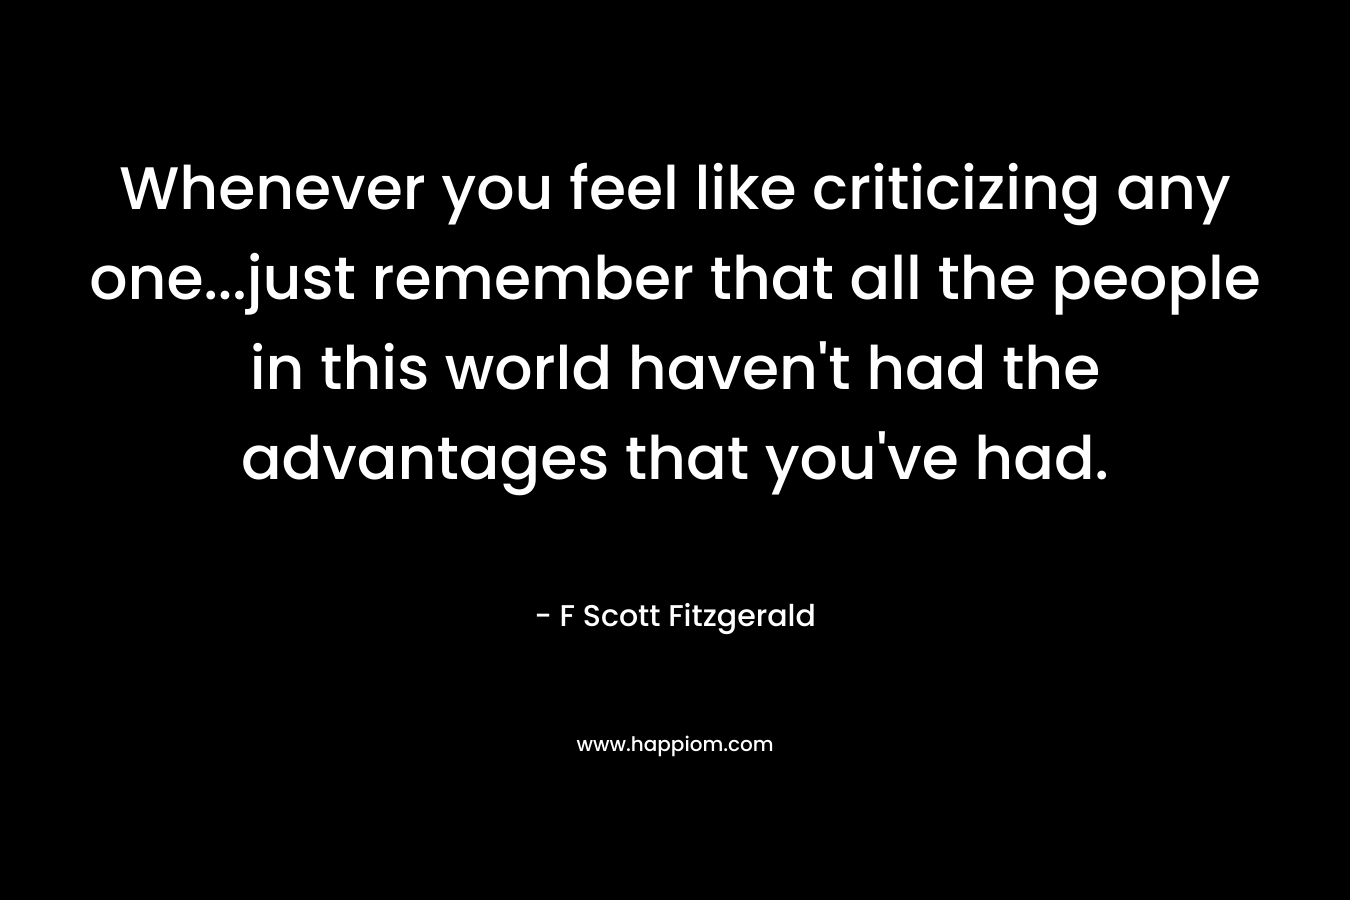 Whenever you feel like criticizing any one…just remember that all the people in this world haven’t had the advantages that you’ve had. – F Scott Fitzgerald